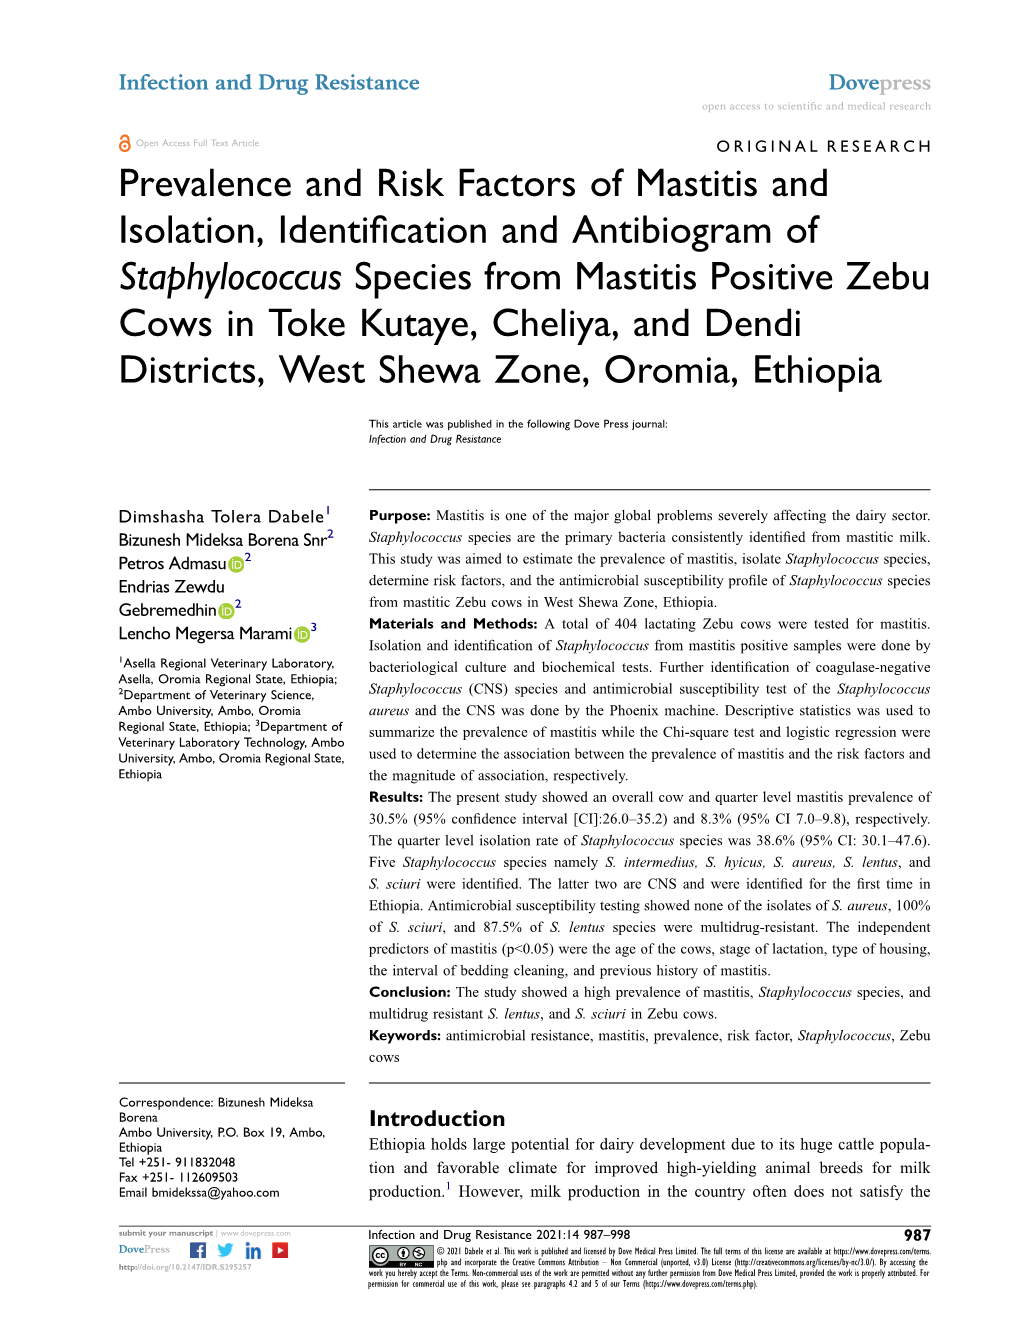 Prevalence and Risk Factors of Mastitis and Isolation, Identification and Antibiogram of Staphylococcus Species from Mastitis Po